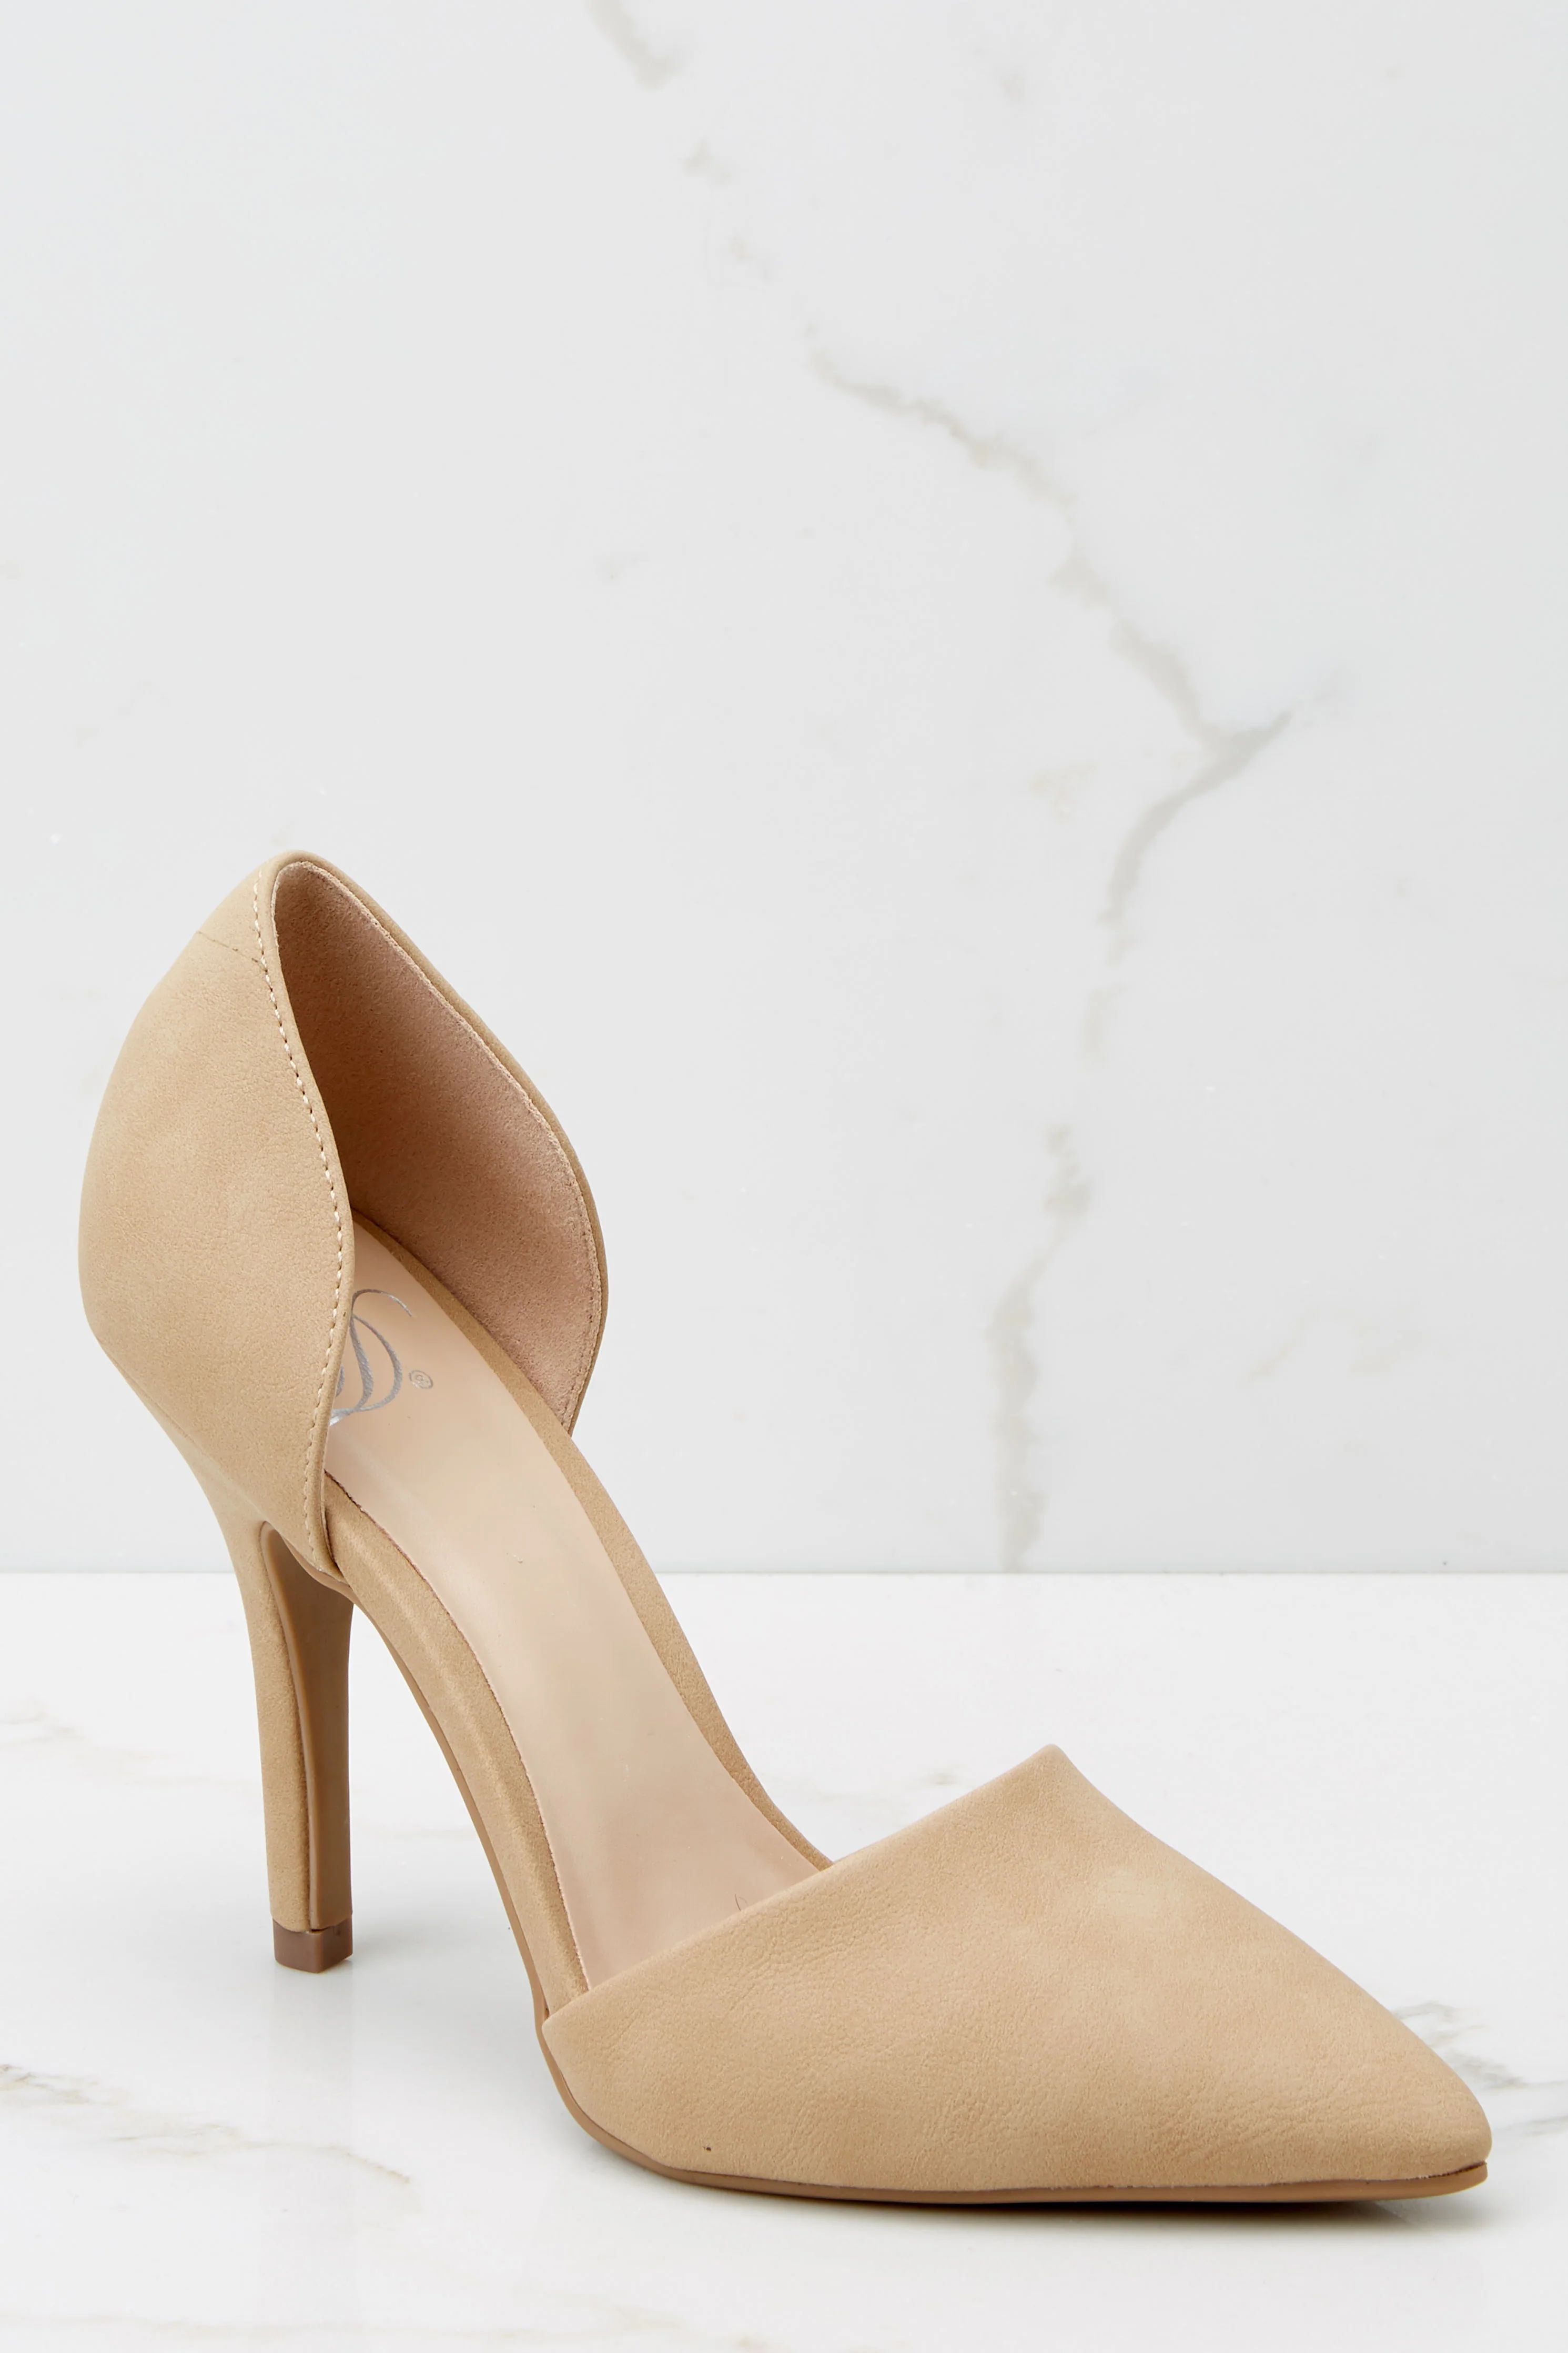 Back To Back Tan Pointed Pumps | Red Dress 